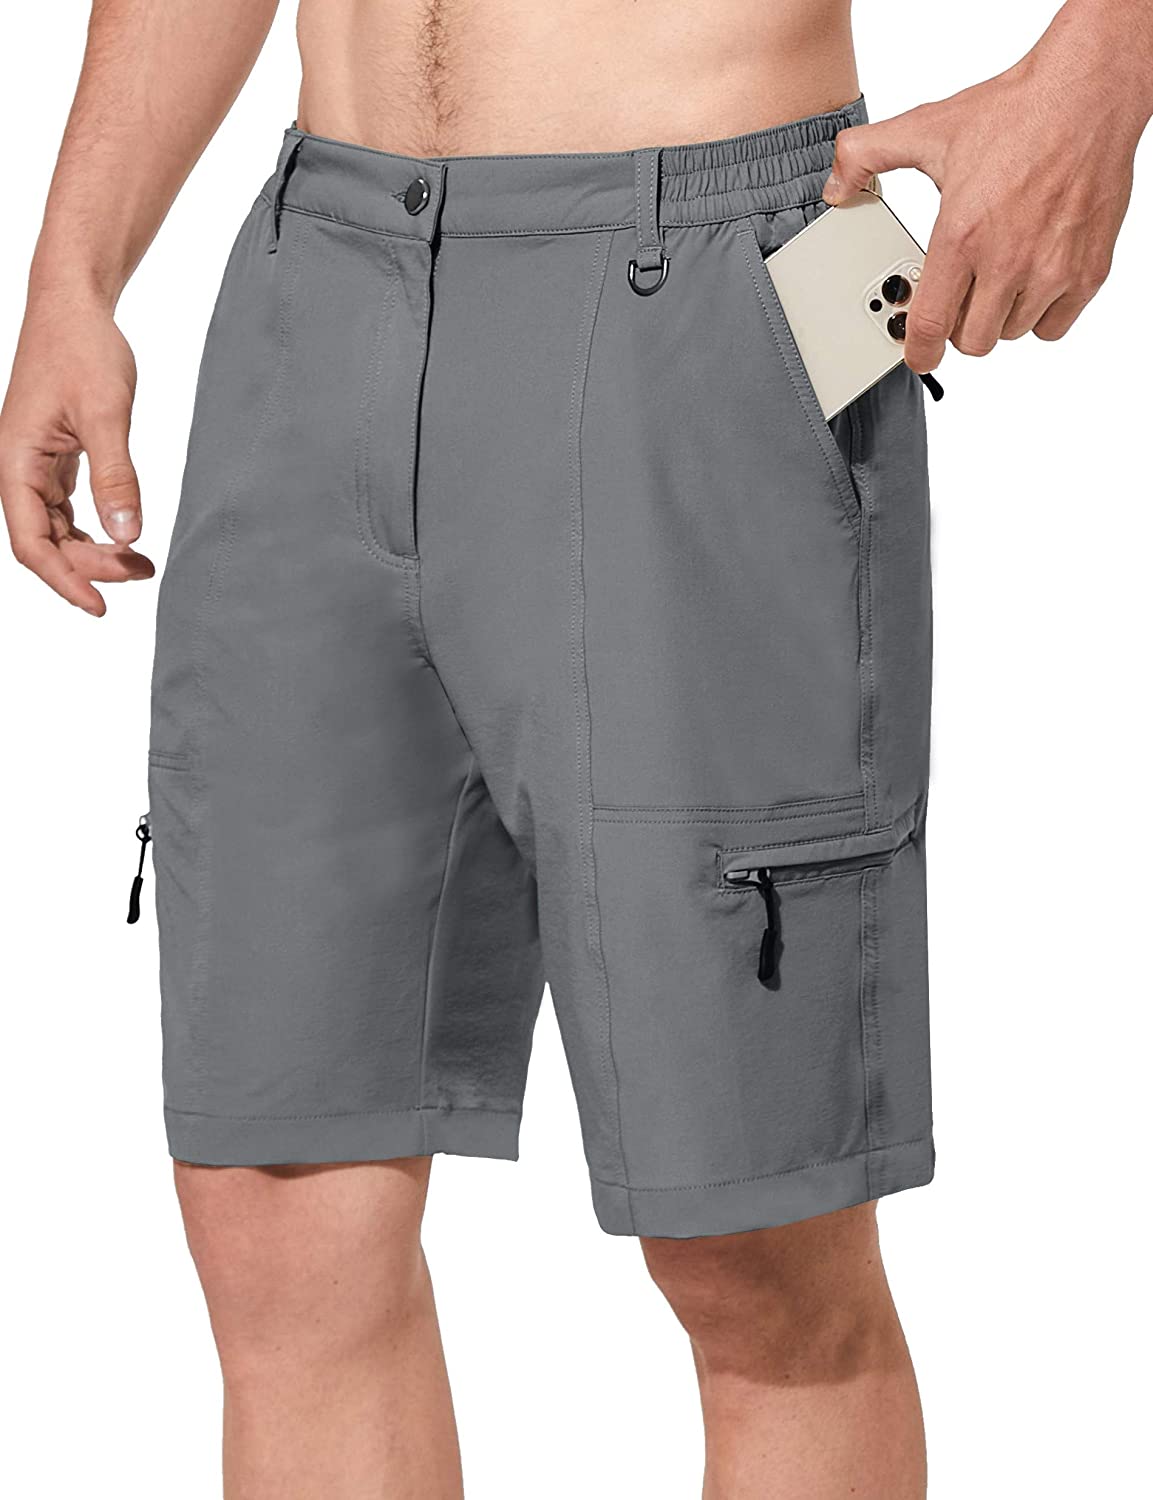 Lightweight Camping Water Resistant Shorts with Zipper Pockets SPECIALMAGIC Men's Hiking Cargo Shorts Quick Dry UPF 50